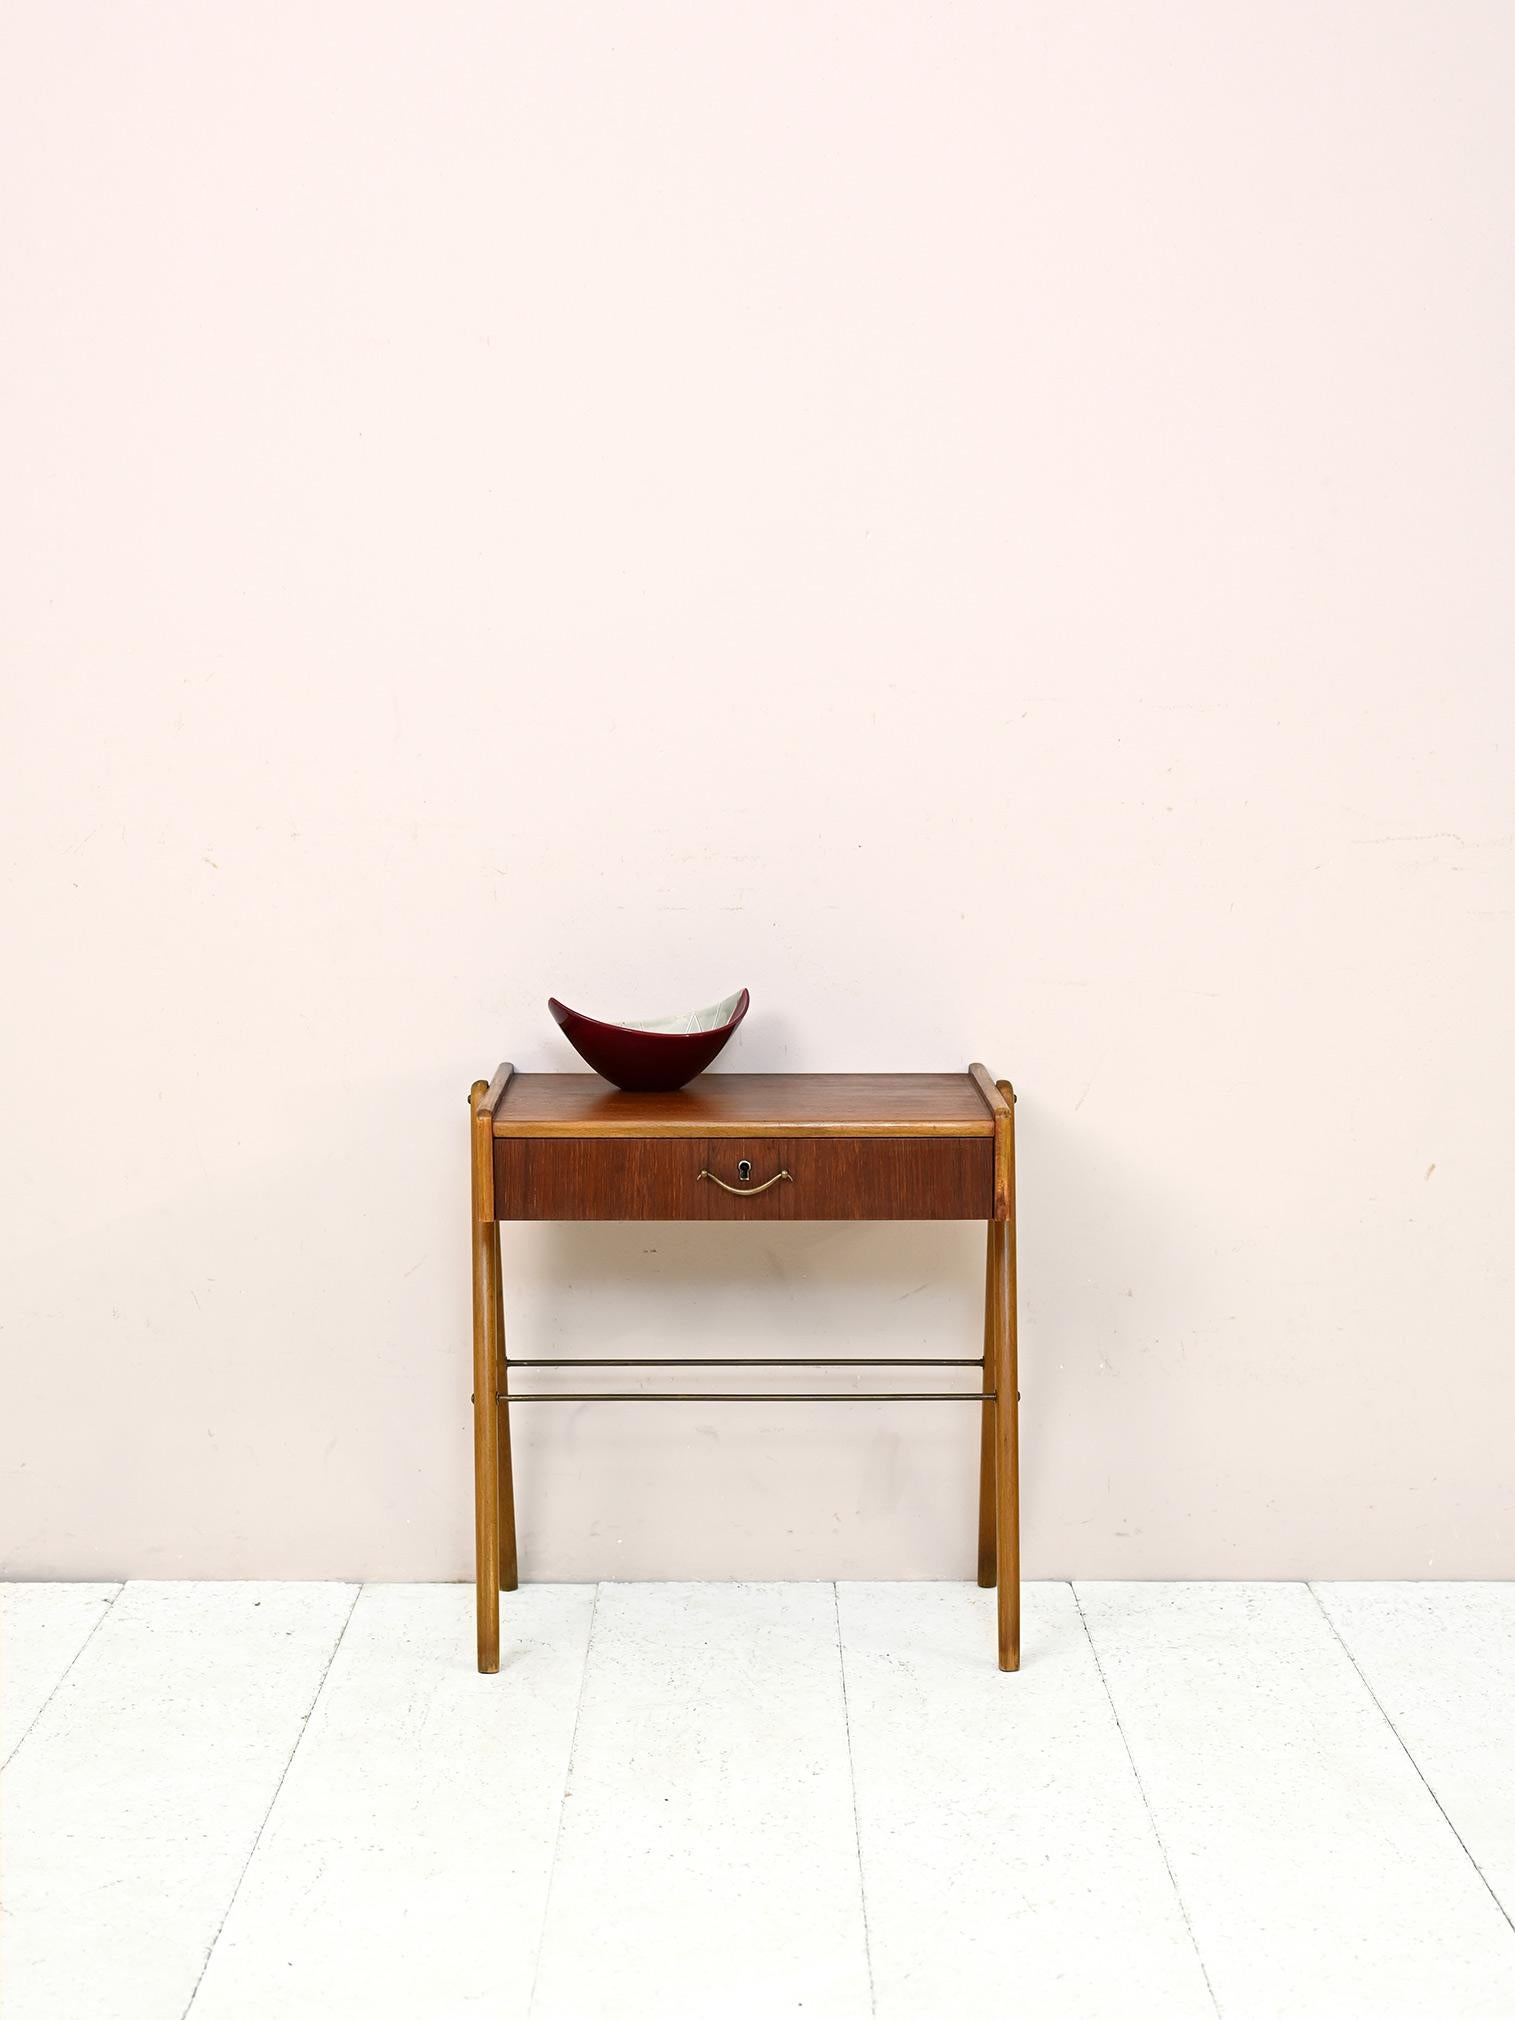 Vintage 1950s nightstand with drawer and magazine shelf.

Elegant and functional, this nightstand of Scandinavian manufacture features modern lines and attention to detail.

The frame features V-shaped legs, a convenient drawer with wooden